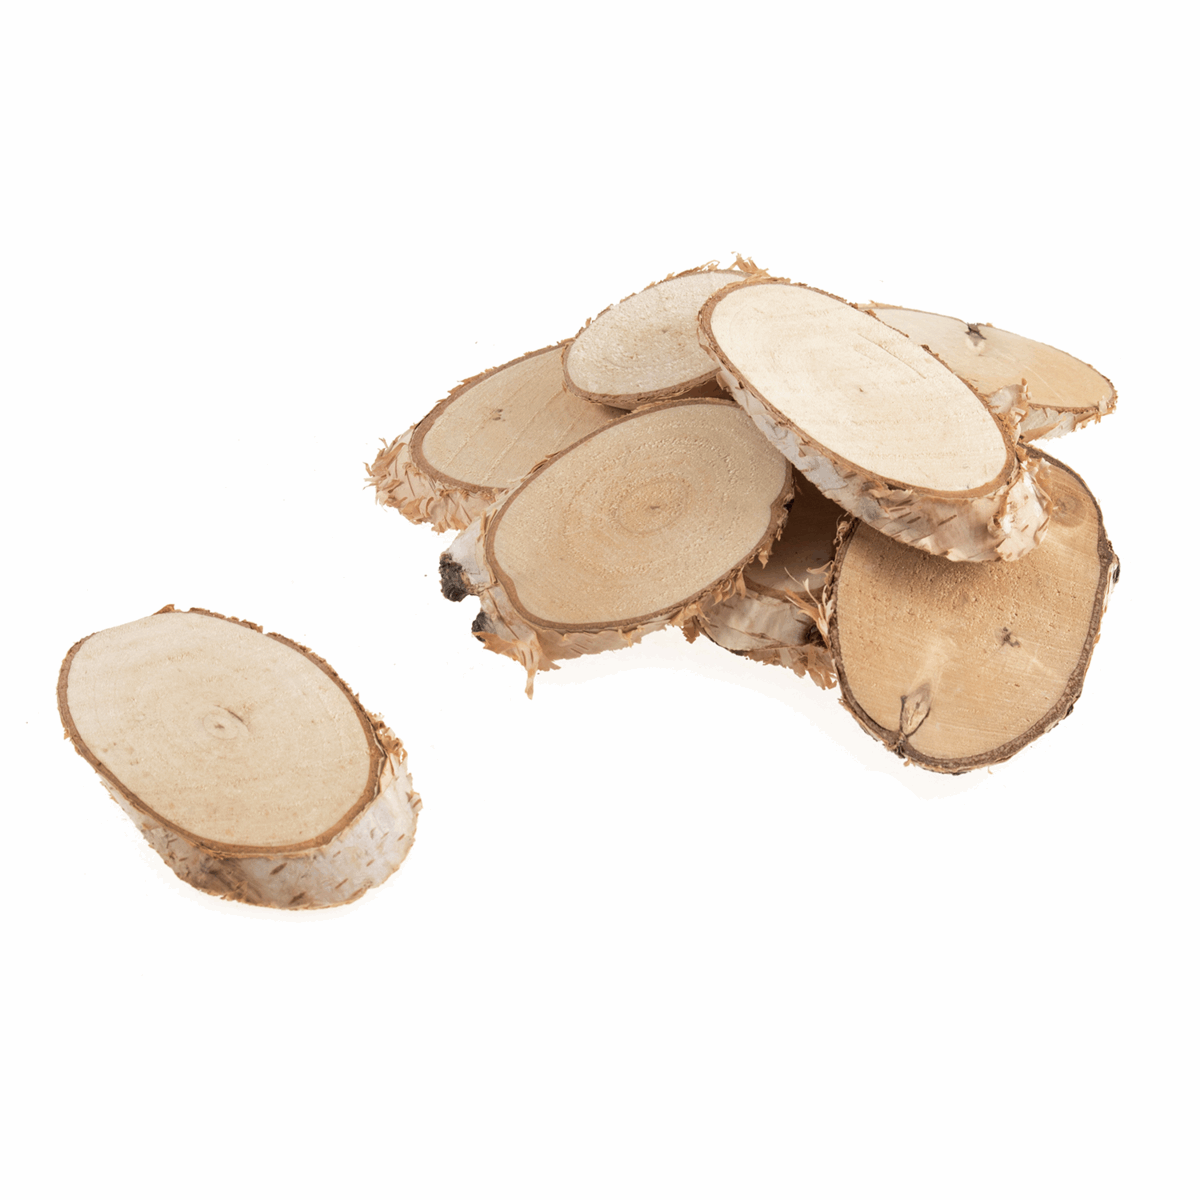 Medium Oval Wooden Slices - 5-7cm (Pack of 25)